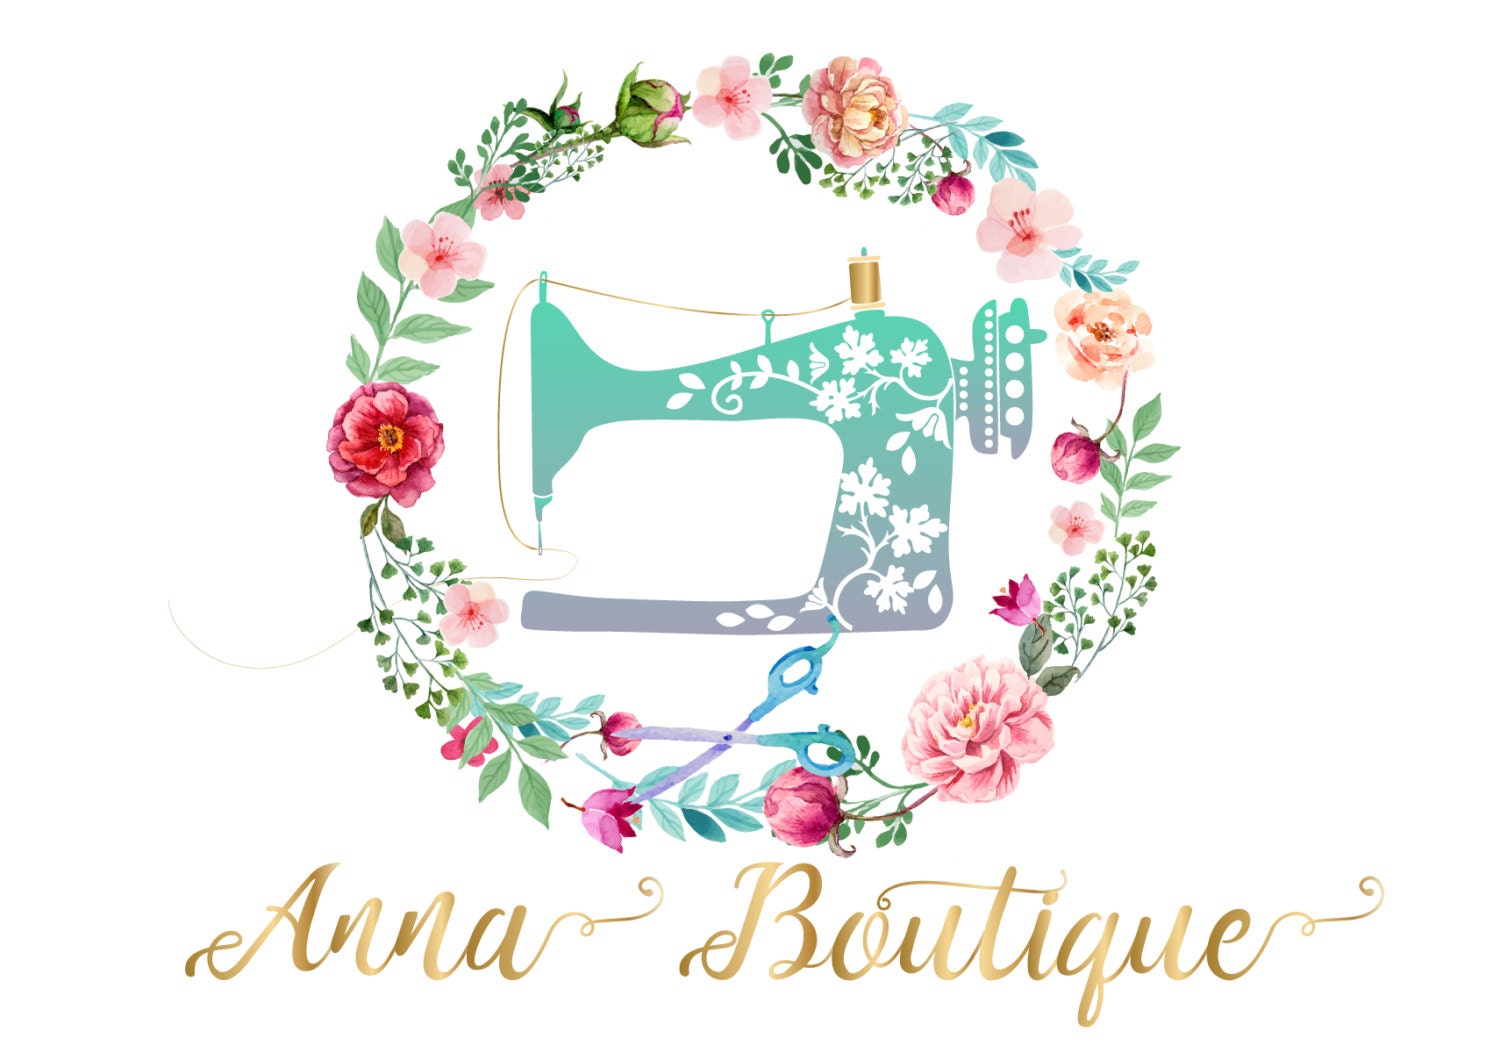 Premade boutique pink sewing machine watercolor business logo